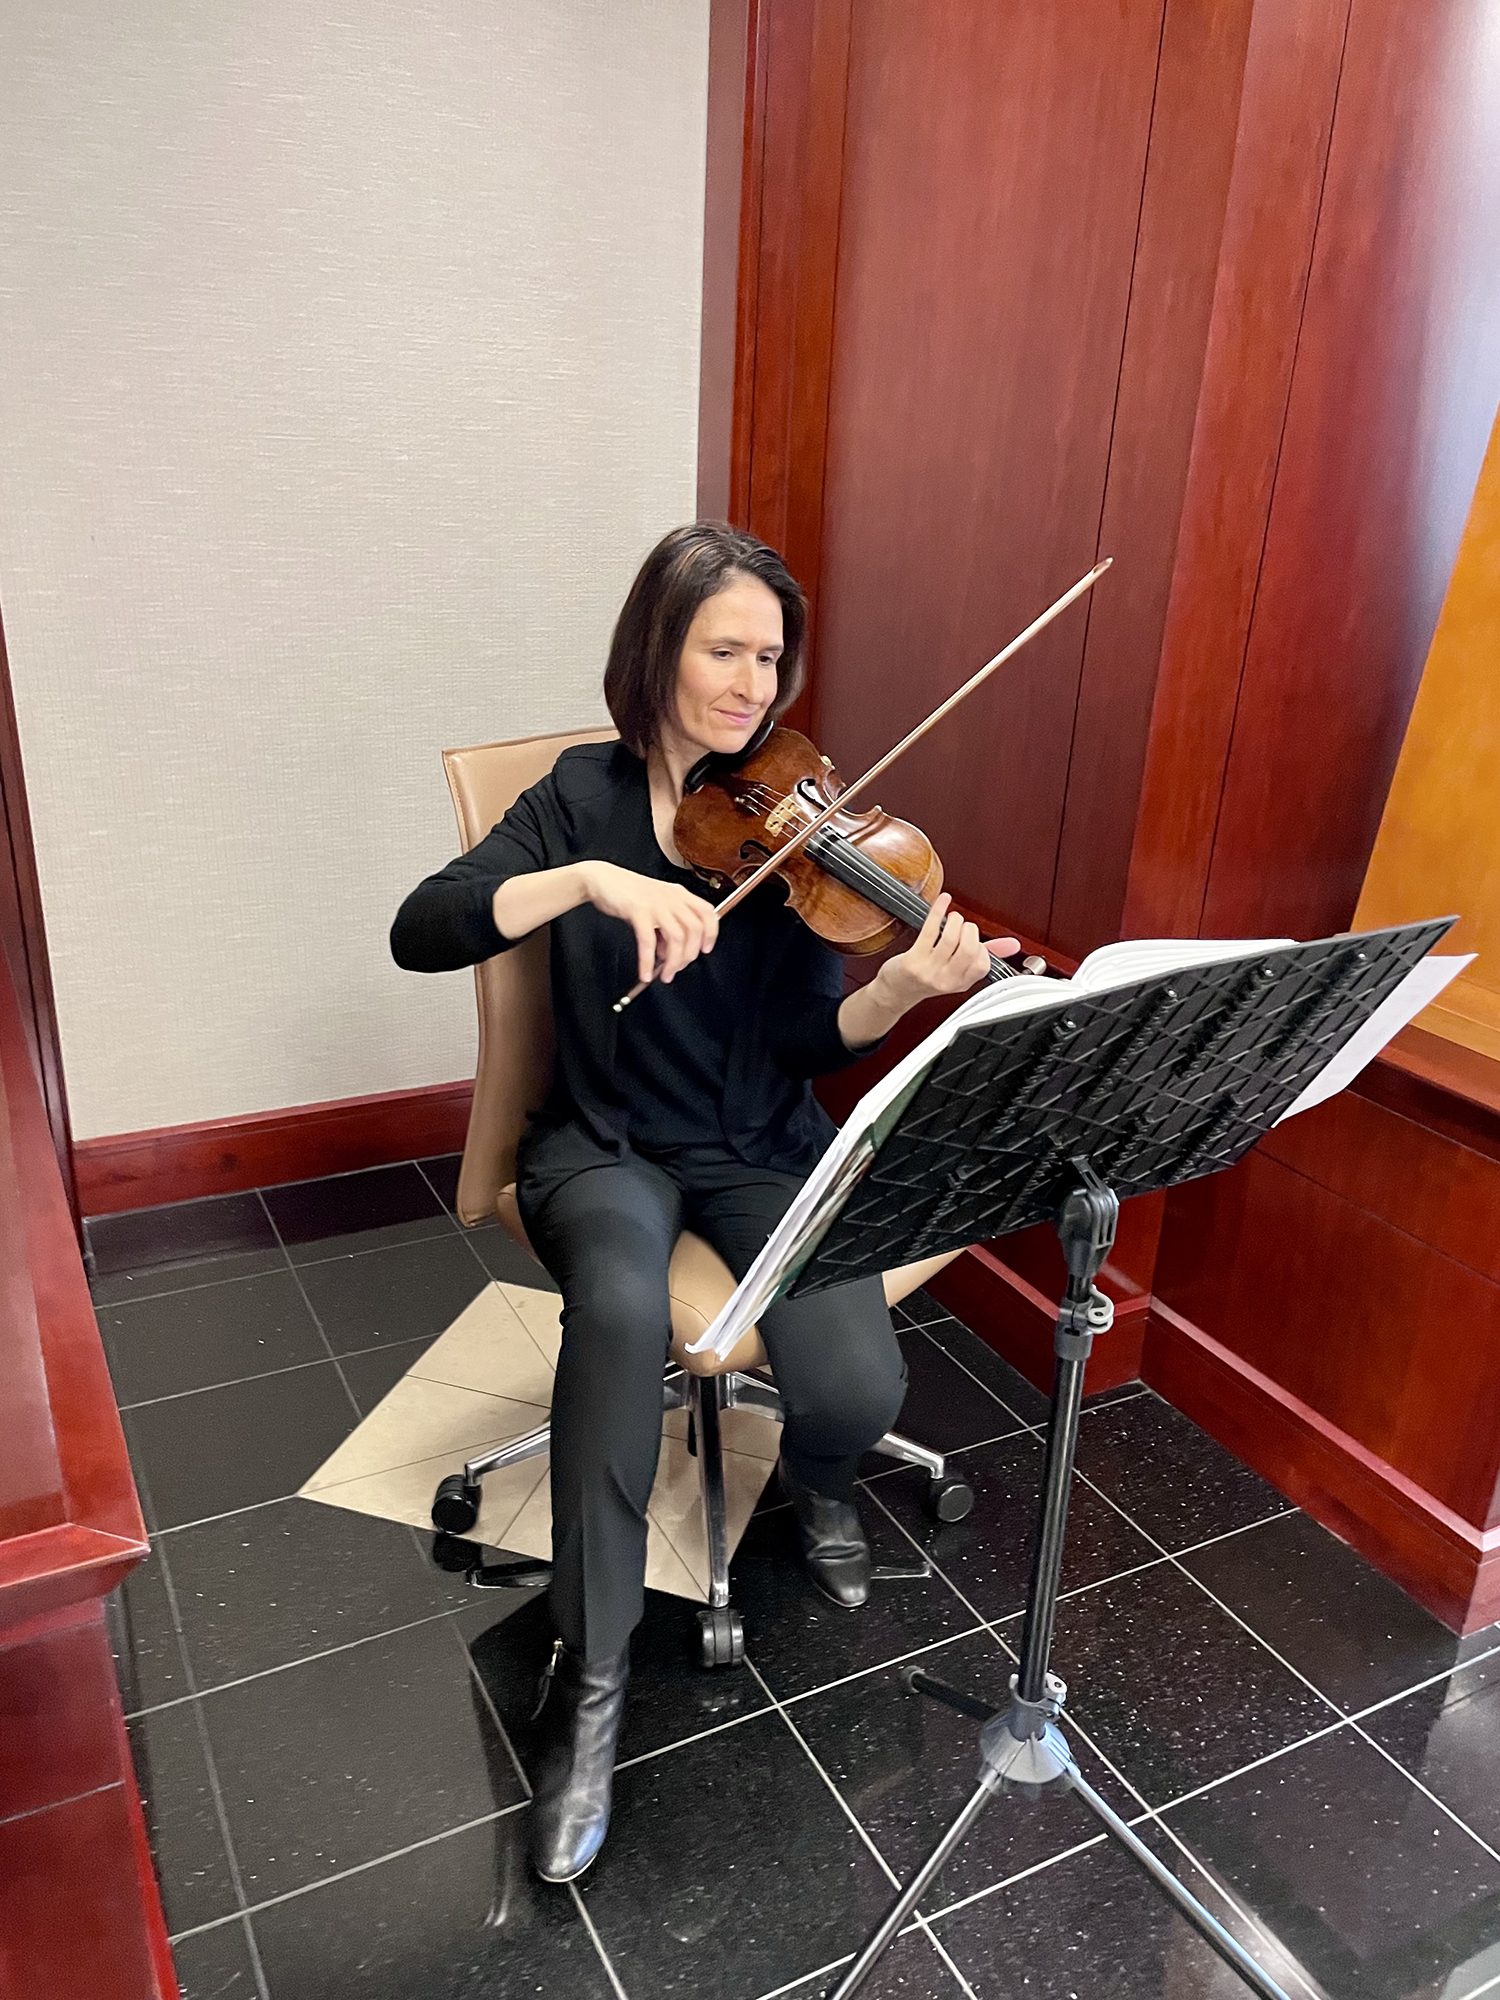 Skyline Events and Socials Holiday Violinist